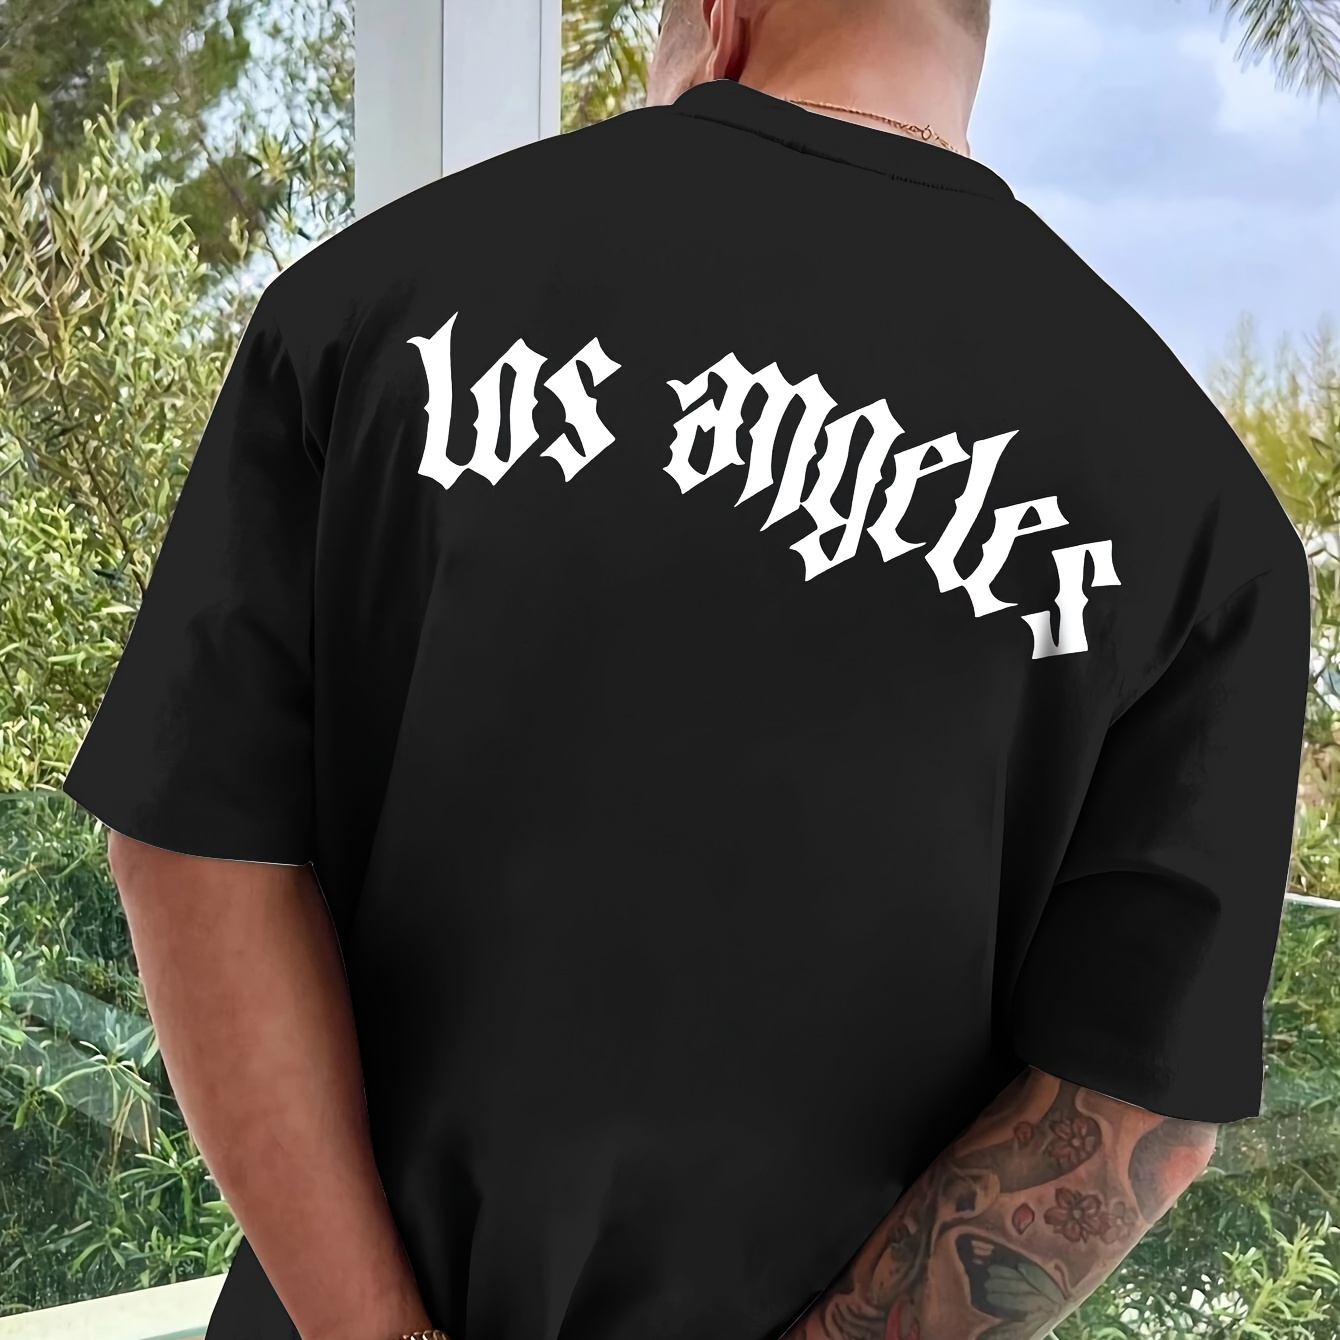 

Los Angeles Print T-shirt, Versatile & Breathable Street , Simple Lightweight Comfy Top, Casual Crew Neck Short Sleeve T-shirt For Summer